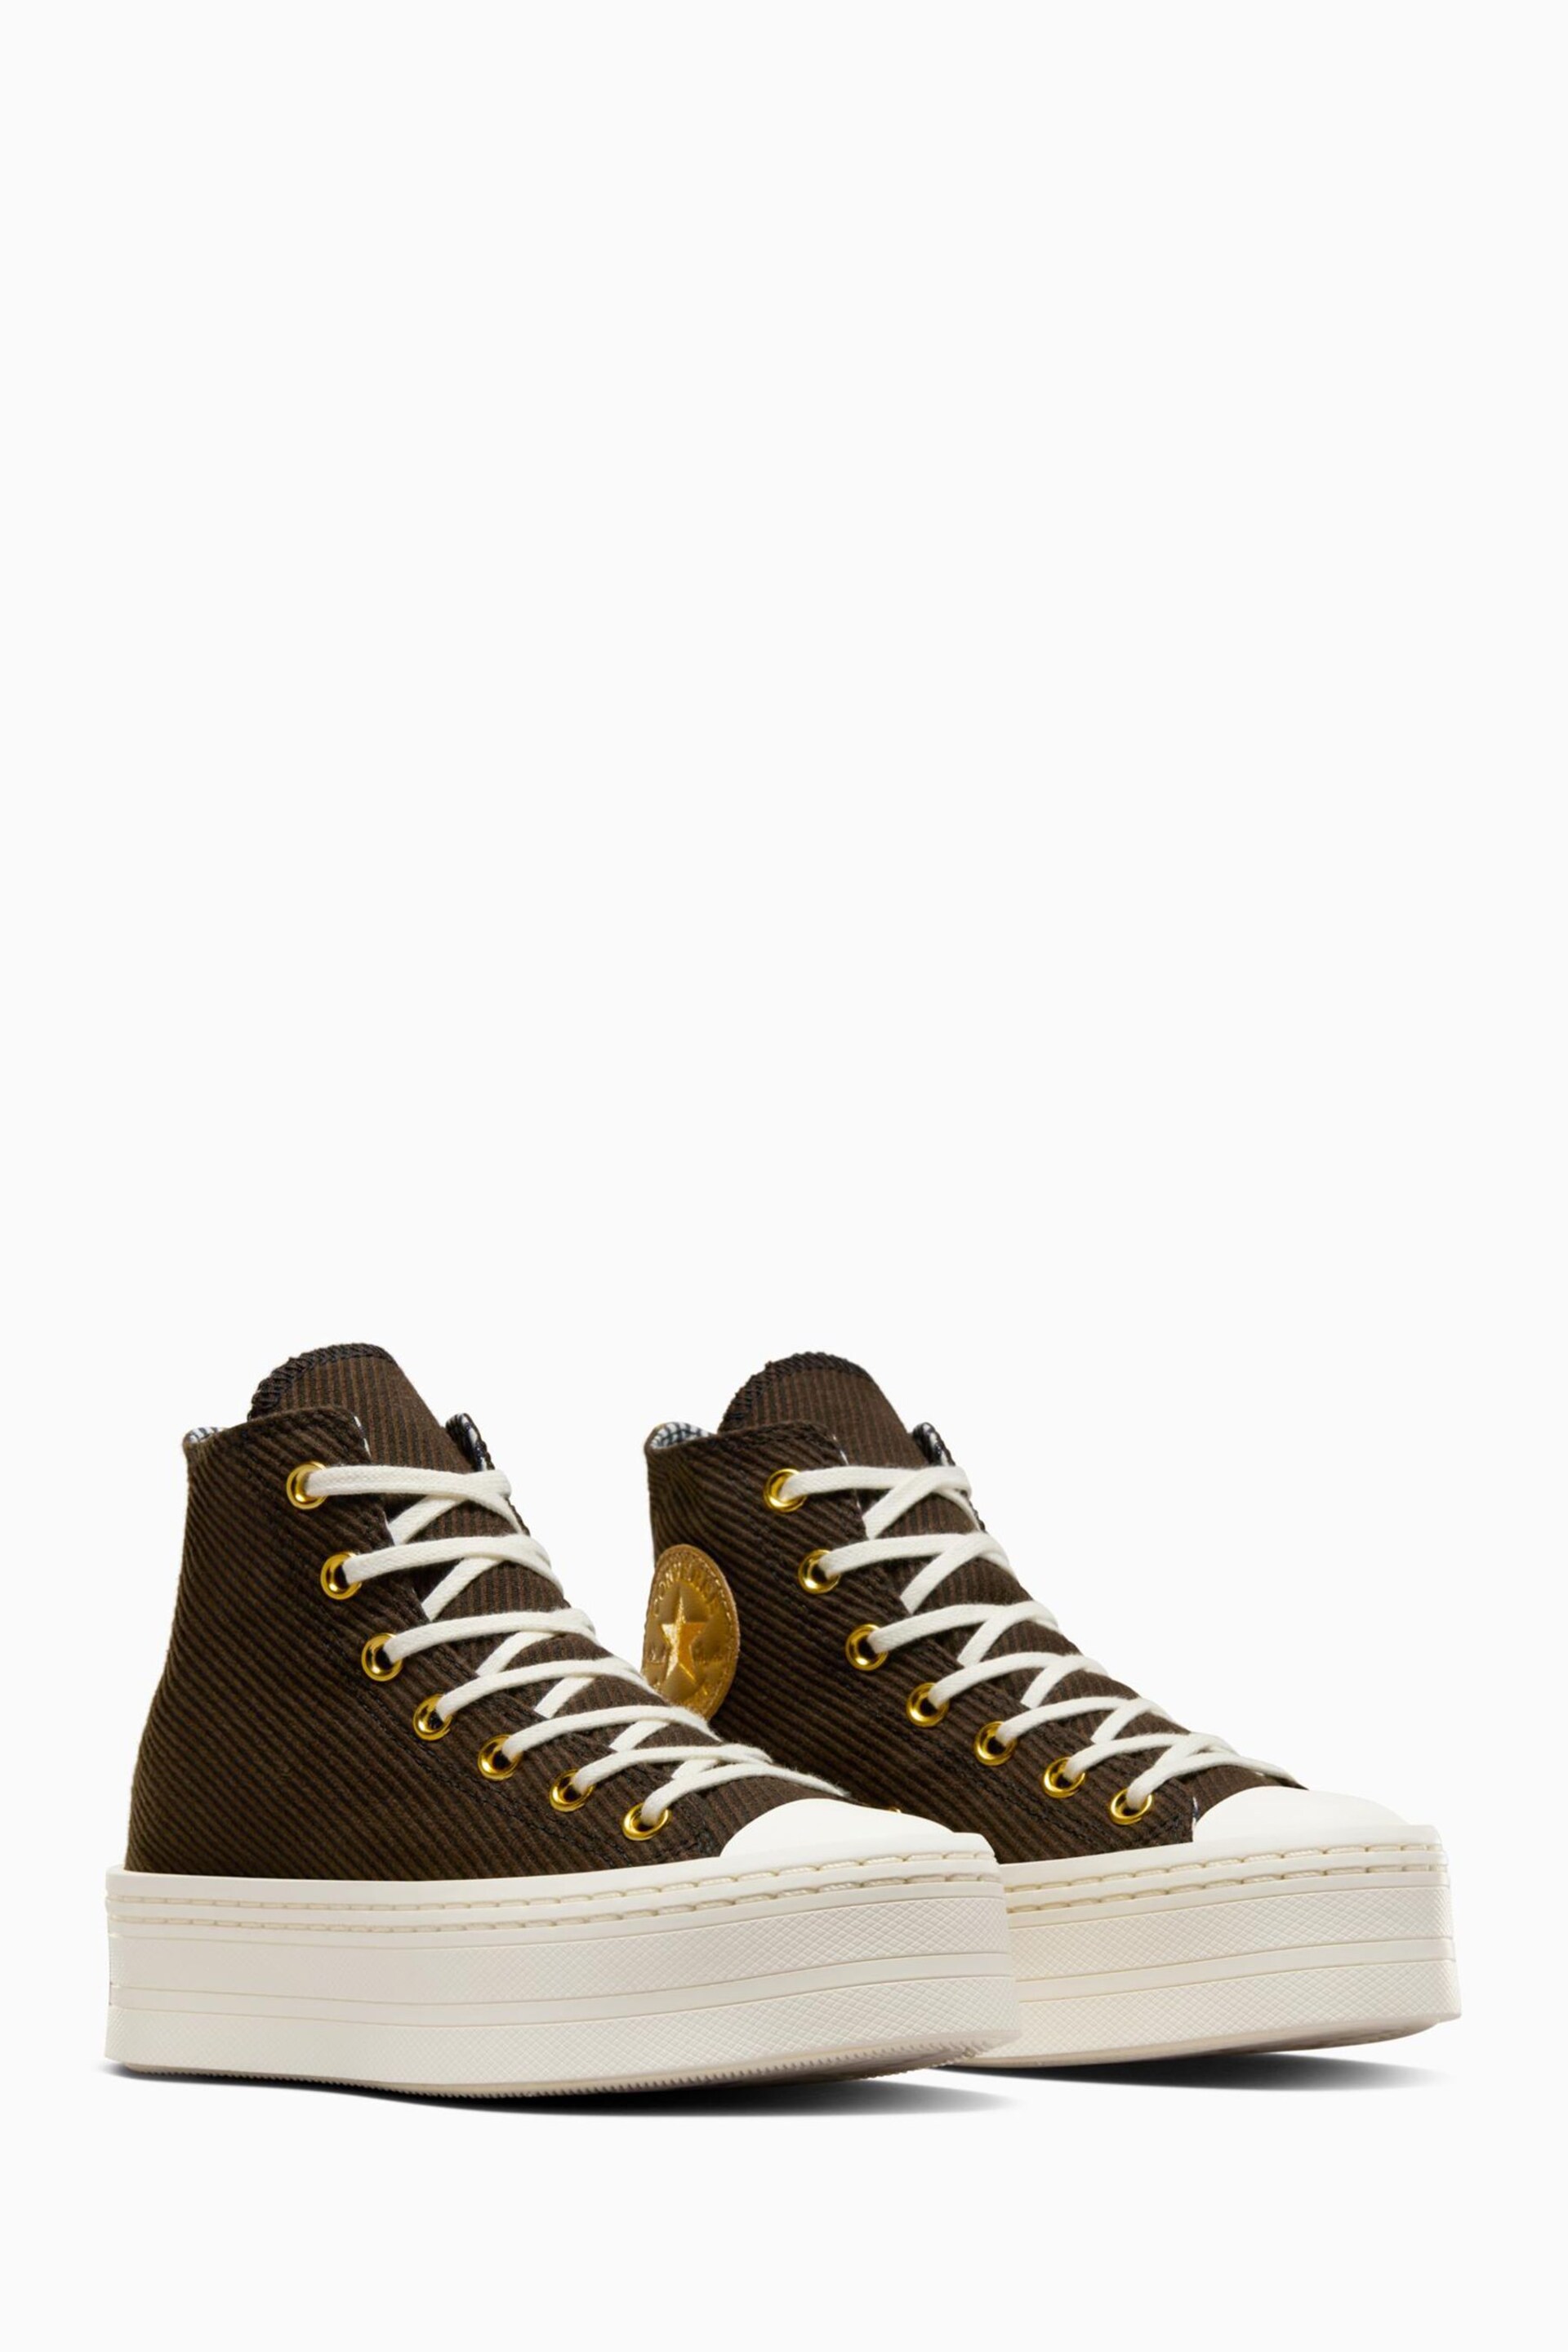 Converse Brown Modern Lift Trainers - Image 3 of 16